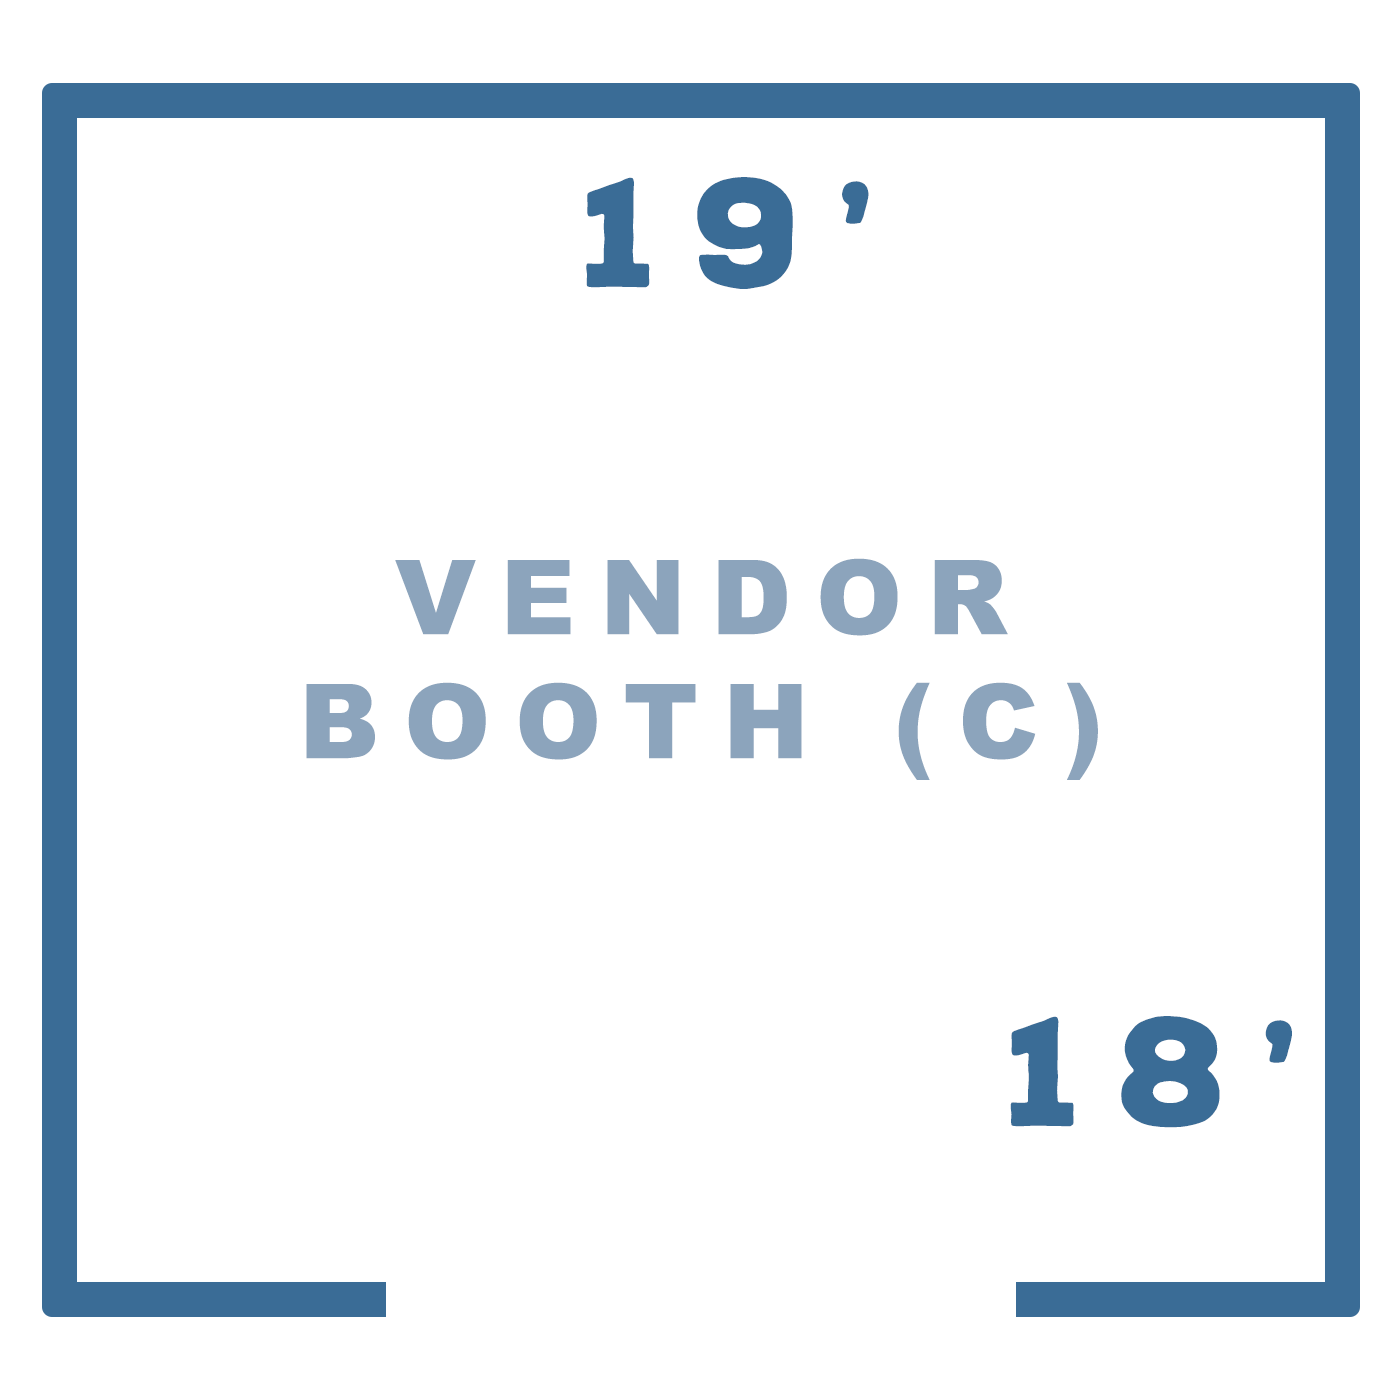 Booth – C